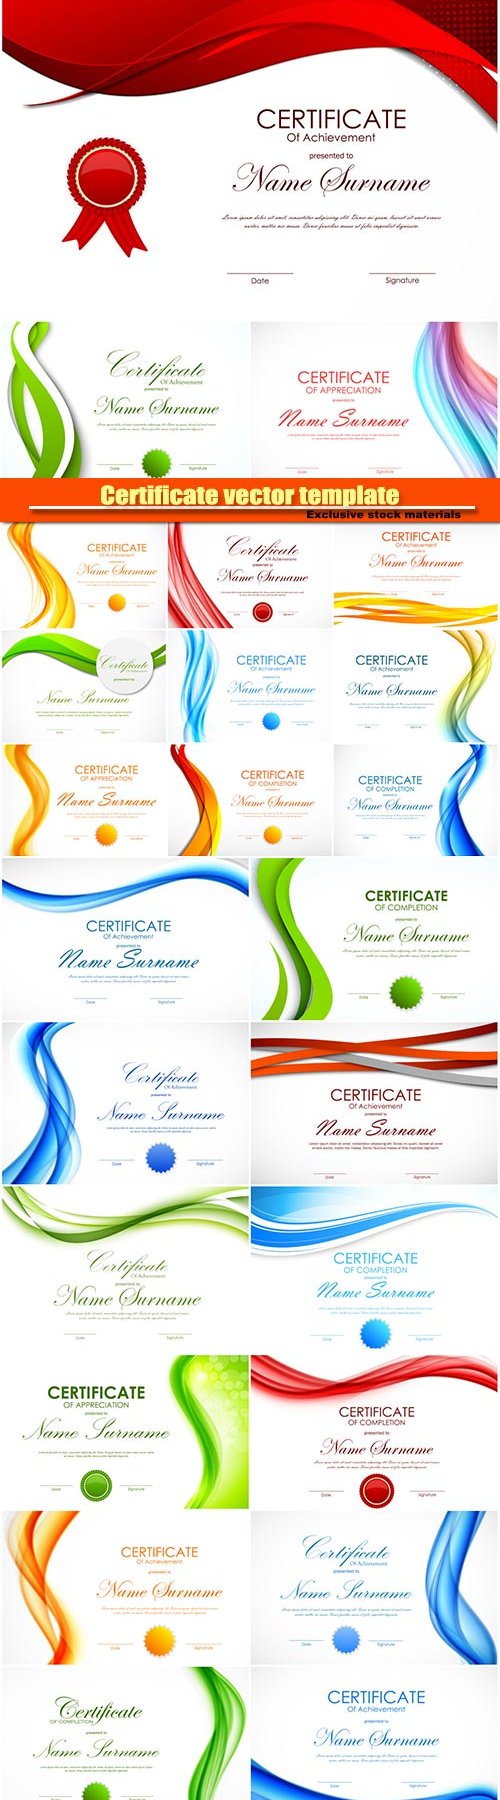 Certificate vector template with light dynamic color wavy curved background and seal